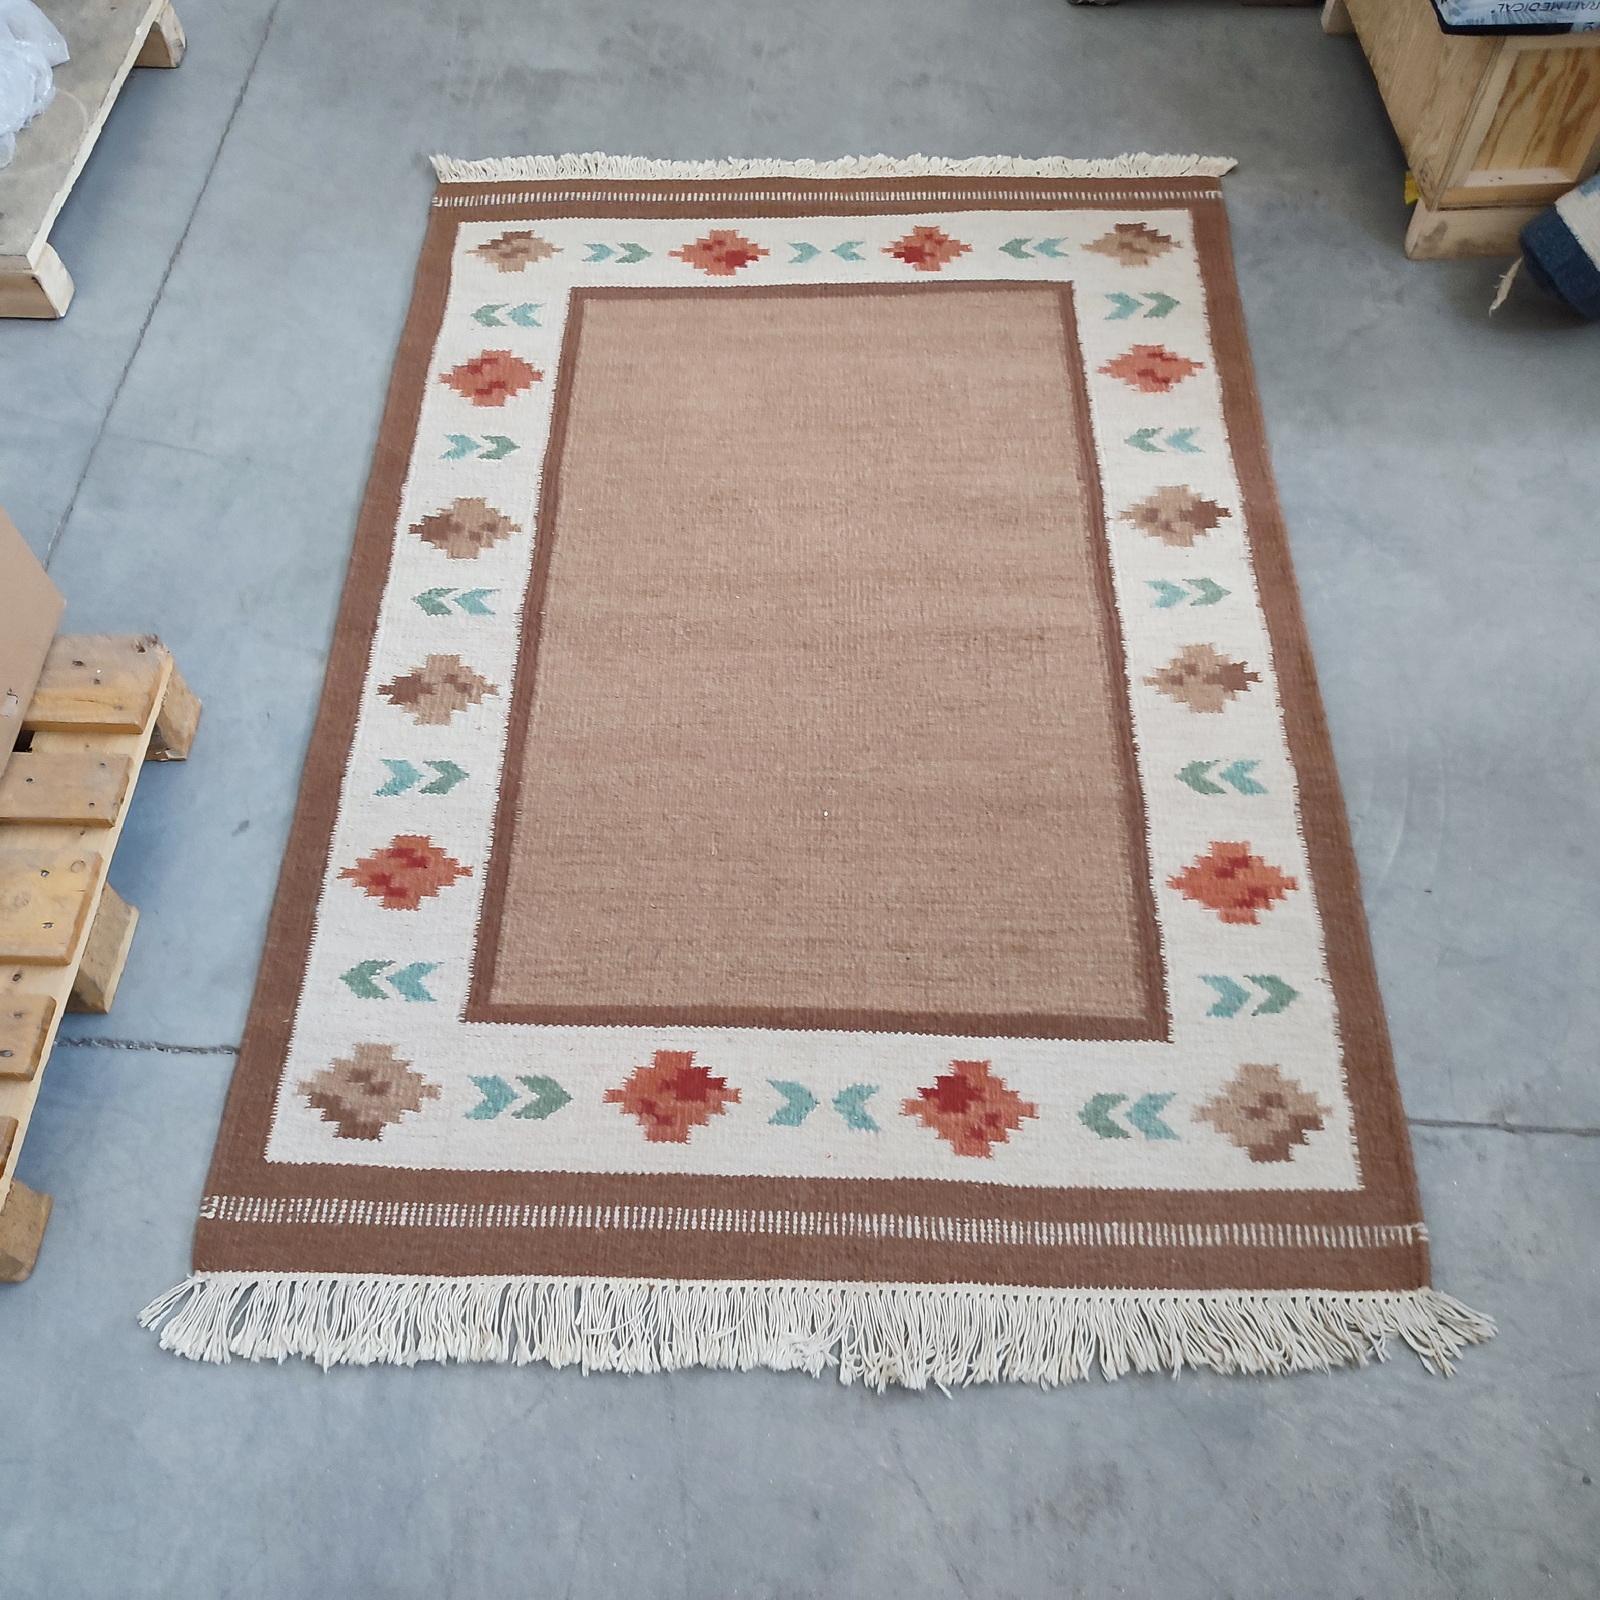 Vintage Swedish Flat-Weave Rug Röllakan Geometric Design in Shades of Brown, Sweden 1980s.
Genuine Röllakan made of wool, hand-woven, the soft sienna field features an outline geometric pattern composed of stylized floral motifs in soft shades of